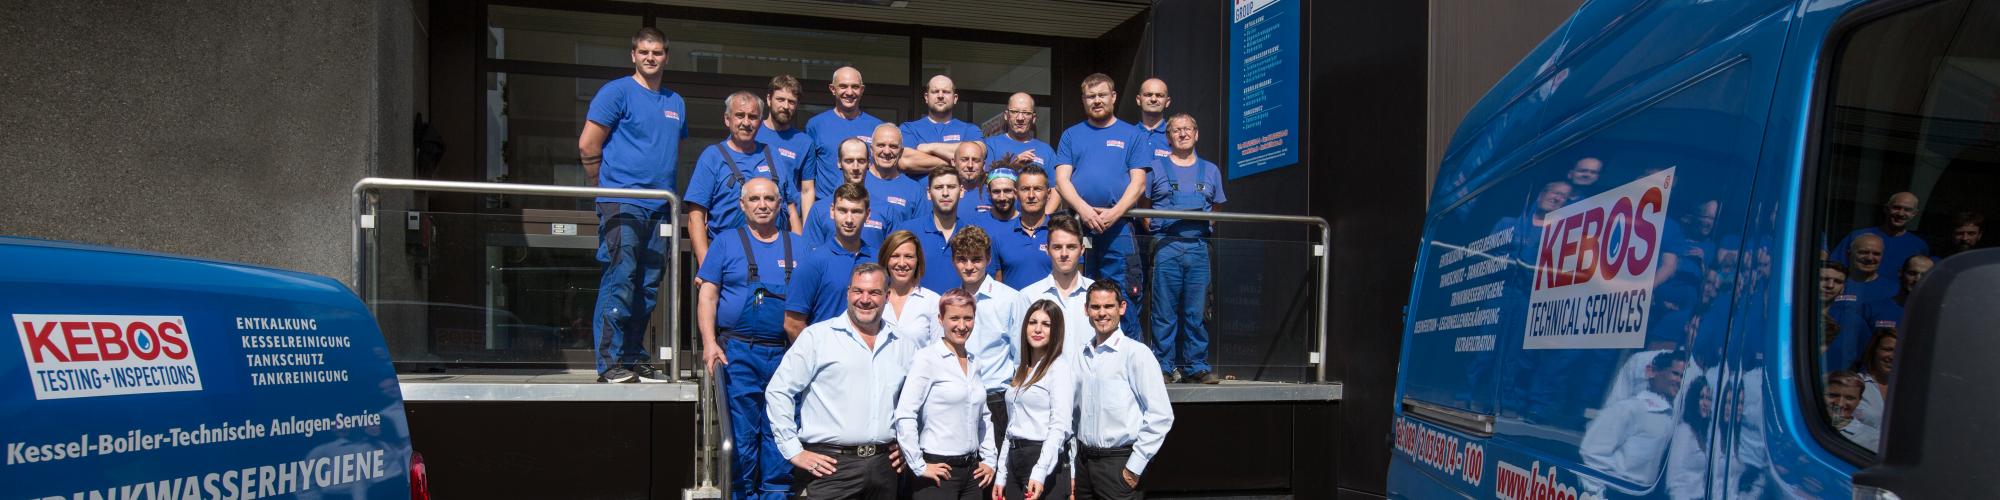 KEBOS Technical Services GmbH